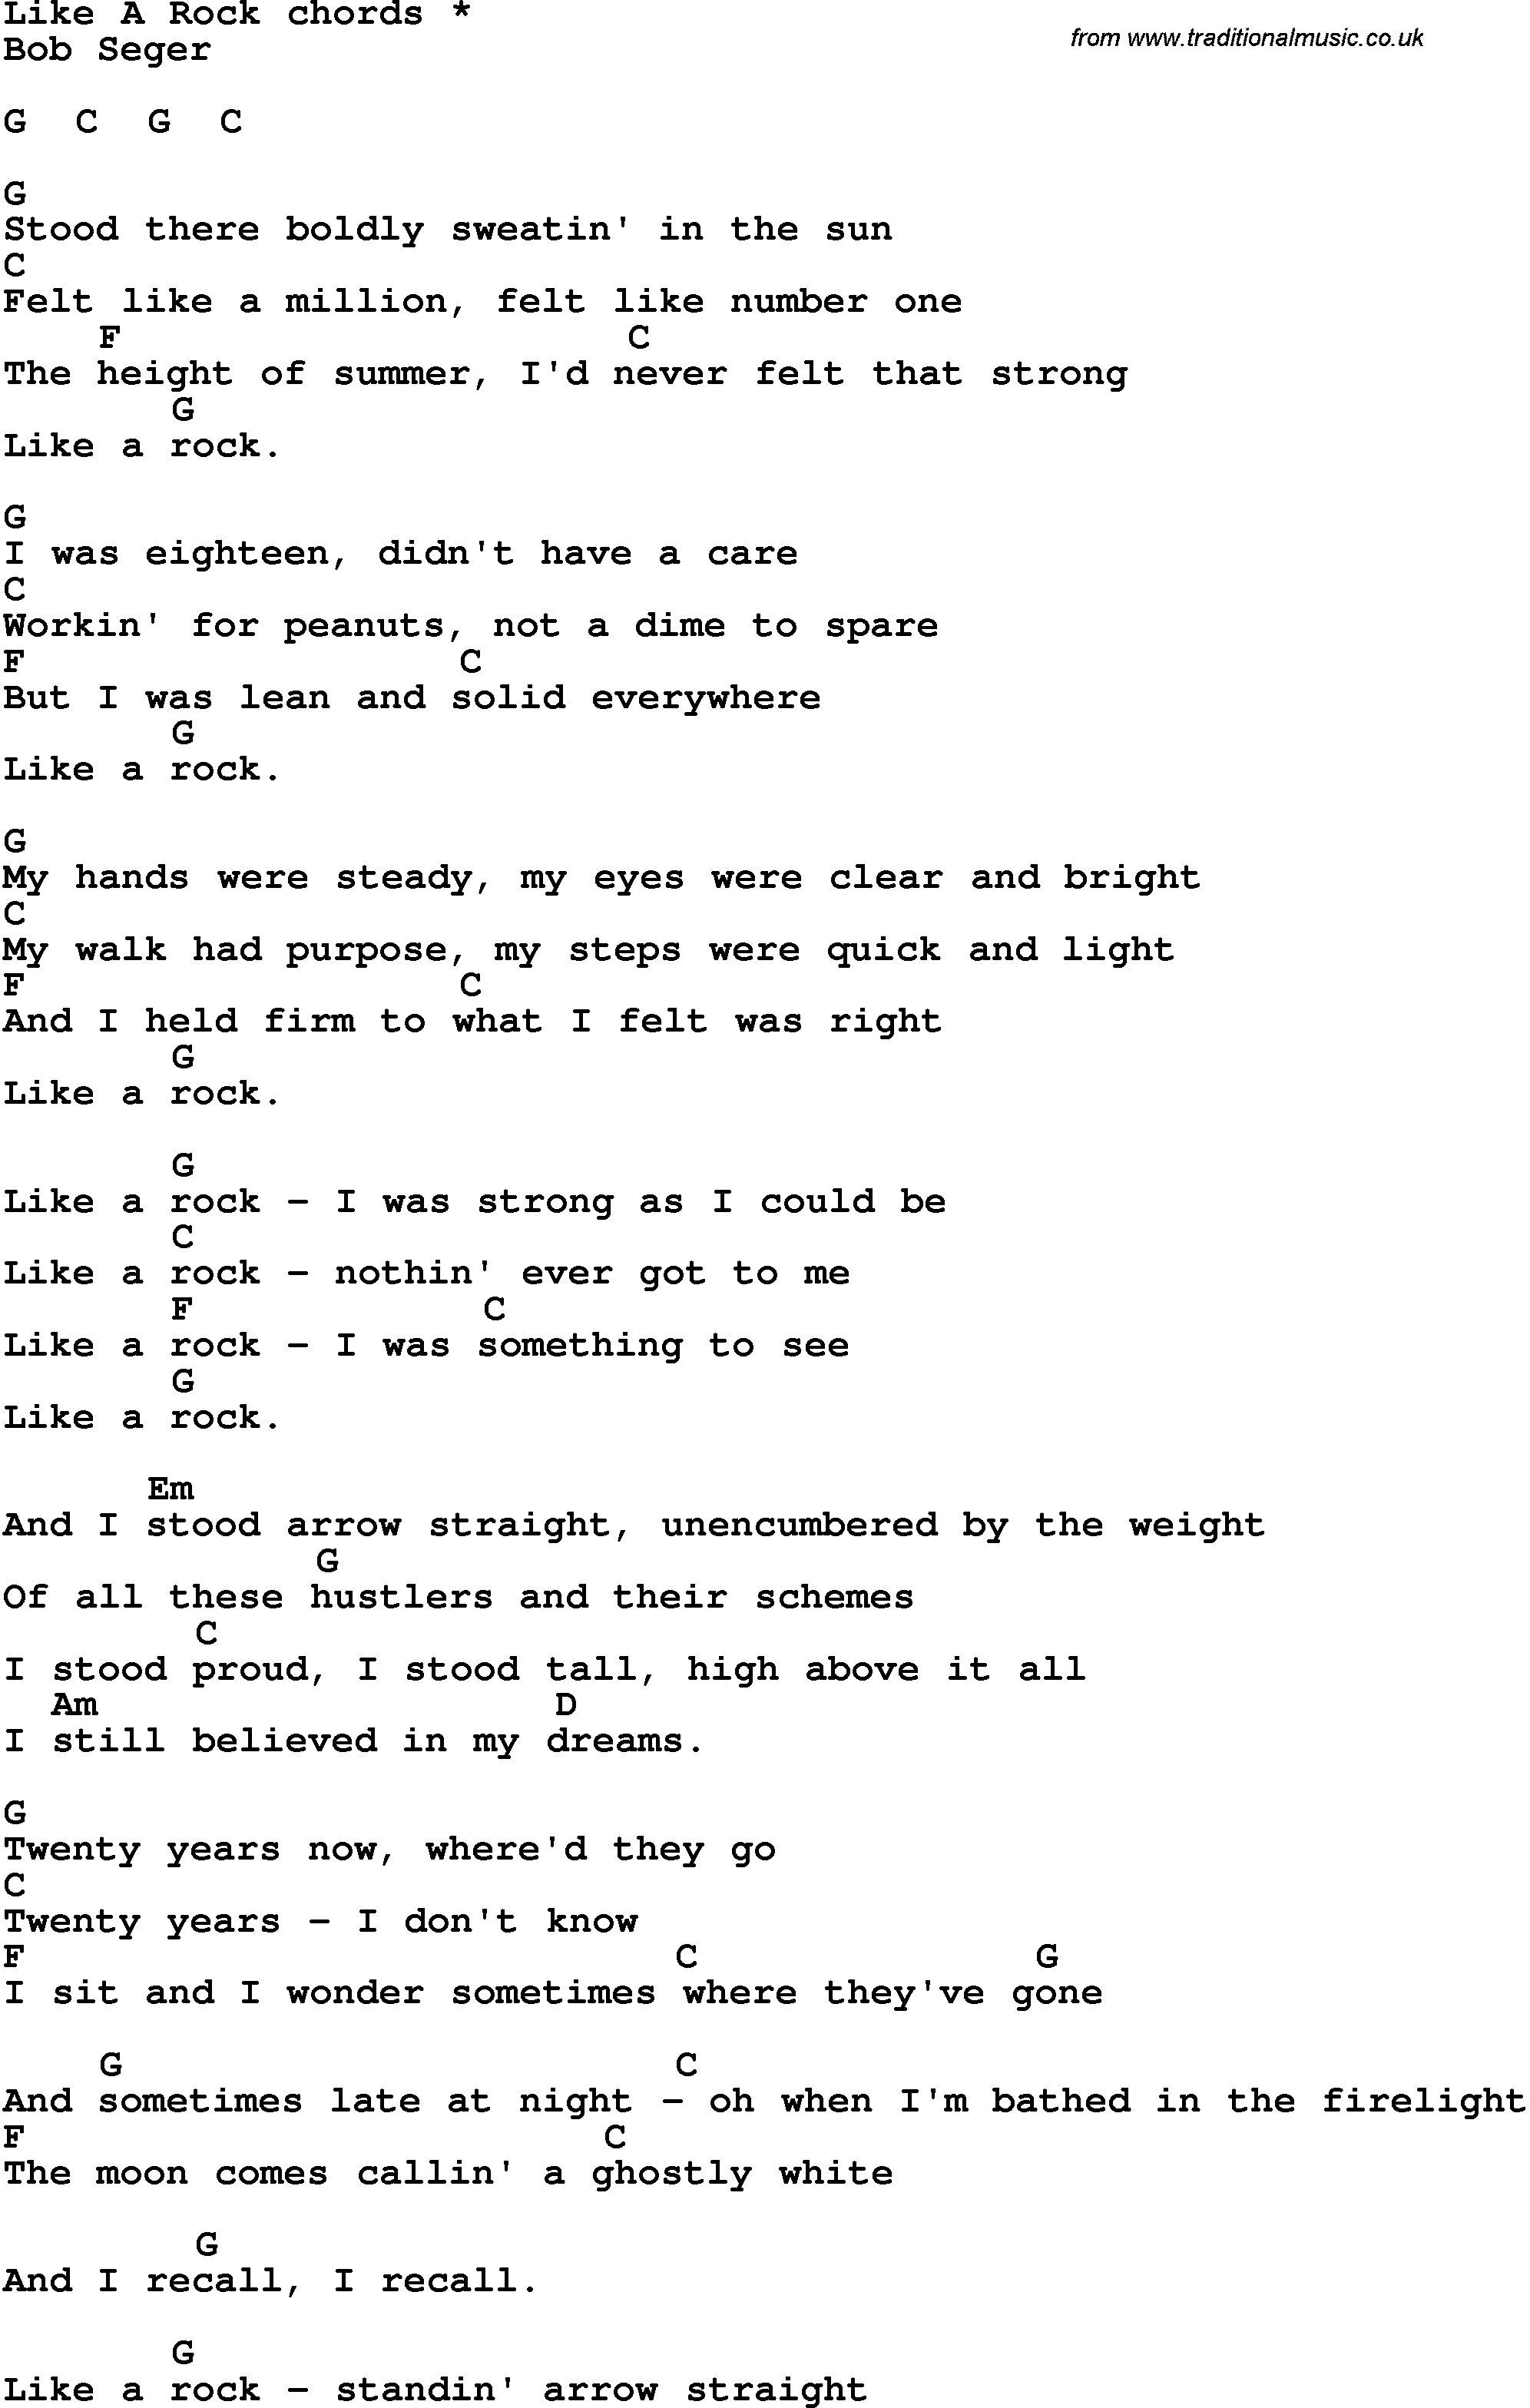 The Weight Chords Song Lyrics With Guitar Chords For Like A Rock